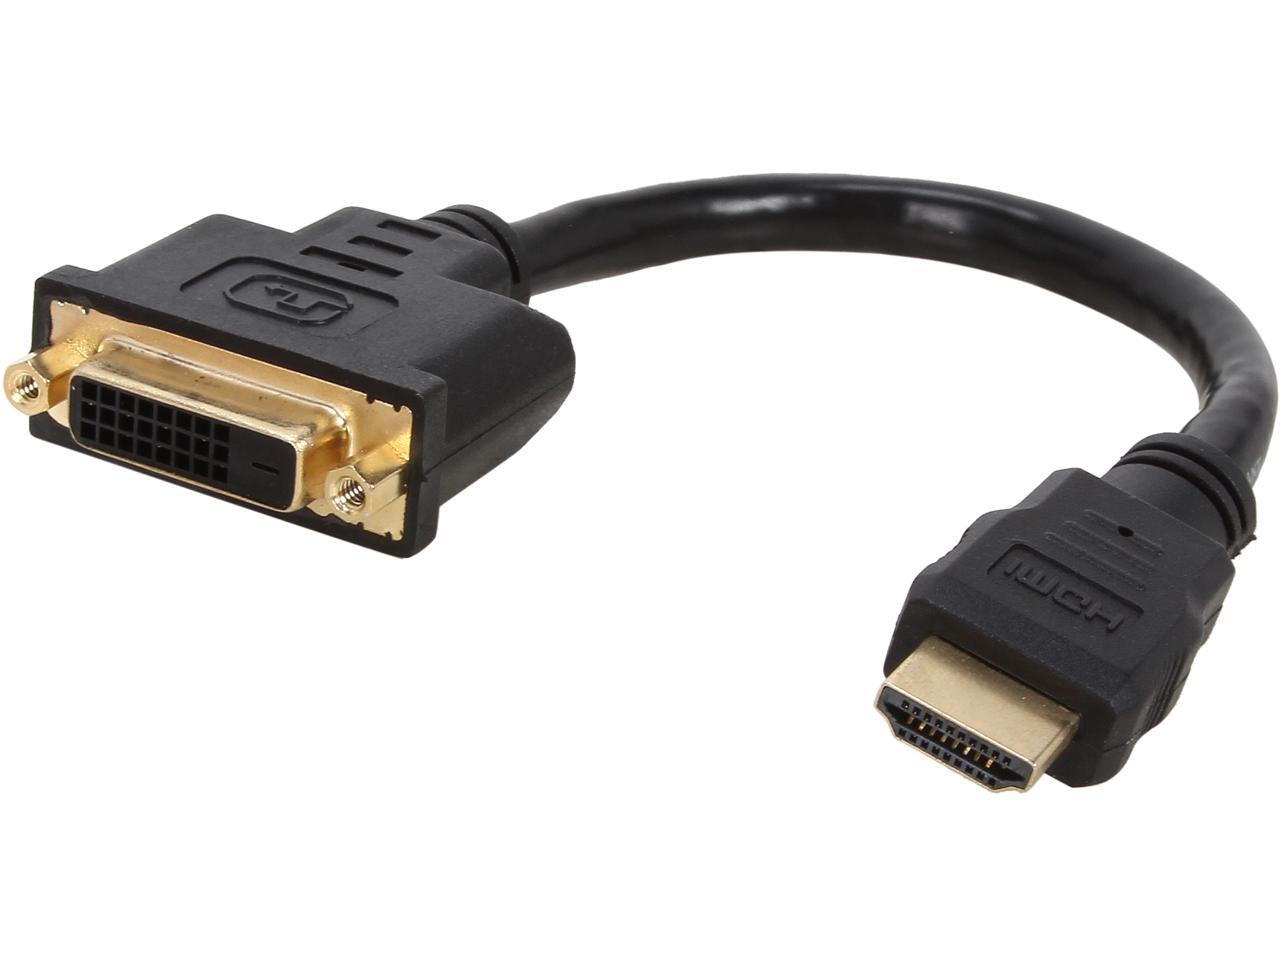 Delvis udsultet alligevel StarTech.com HDDVIMF8IN 8in HDMI to DVI-D Video Cable Adapter - HDMI Male  to DVI Female - HDMI to DVI Dongle Adapter Cable - Newegg.com